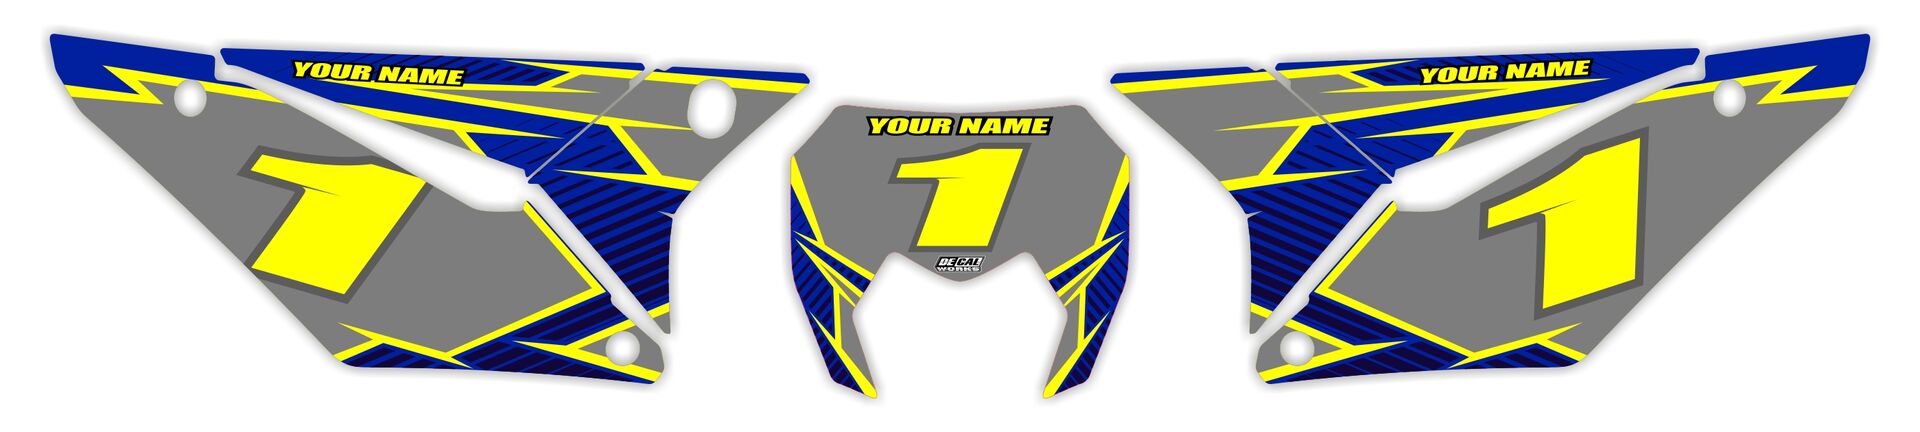 Number Plate Graphics Kit with Airbox Sherco T-11 Series